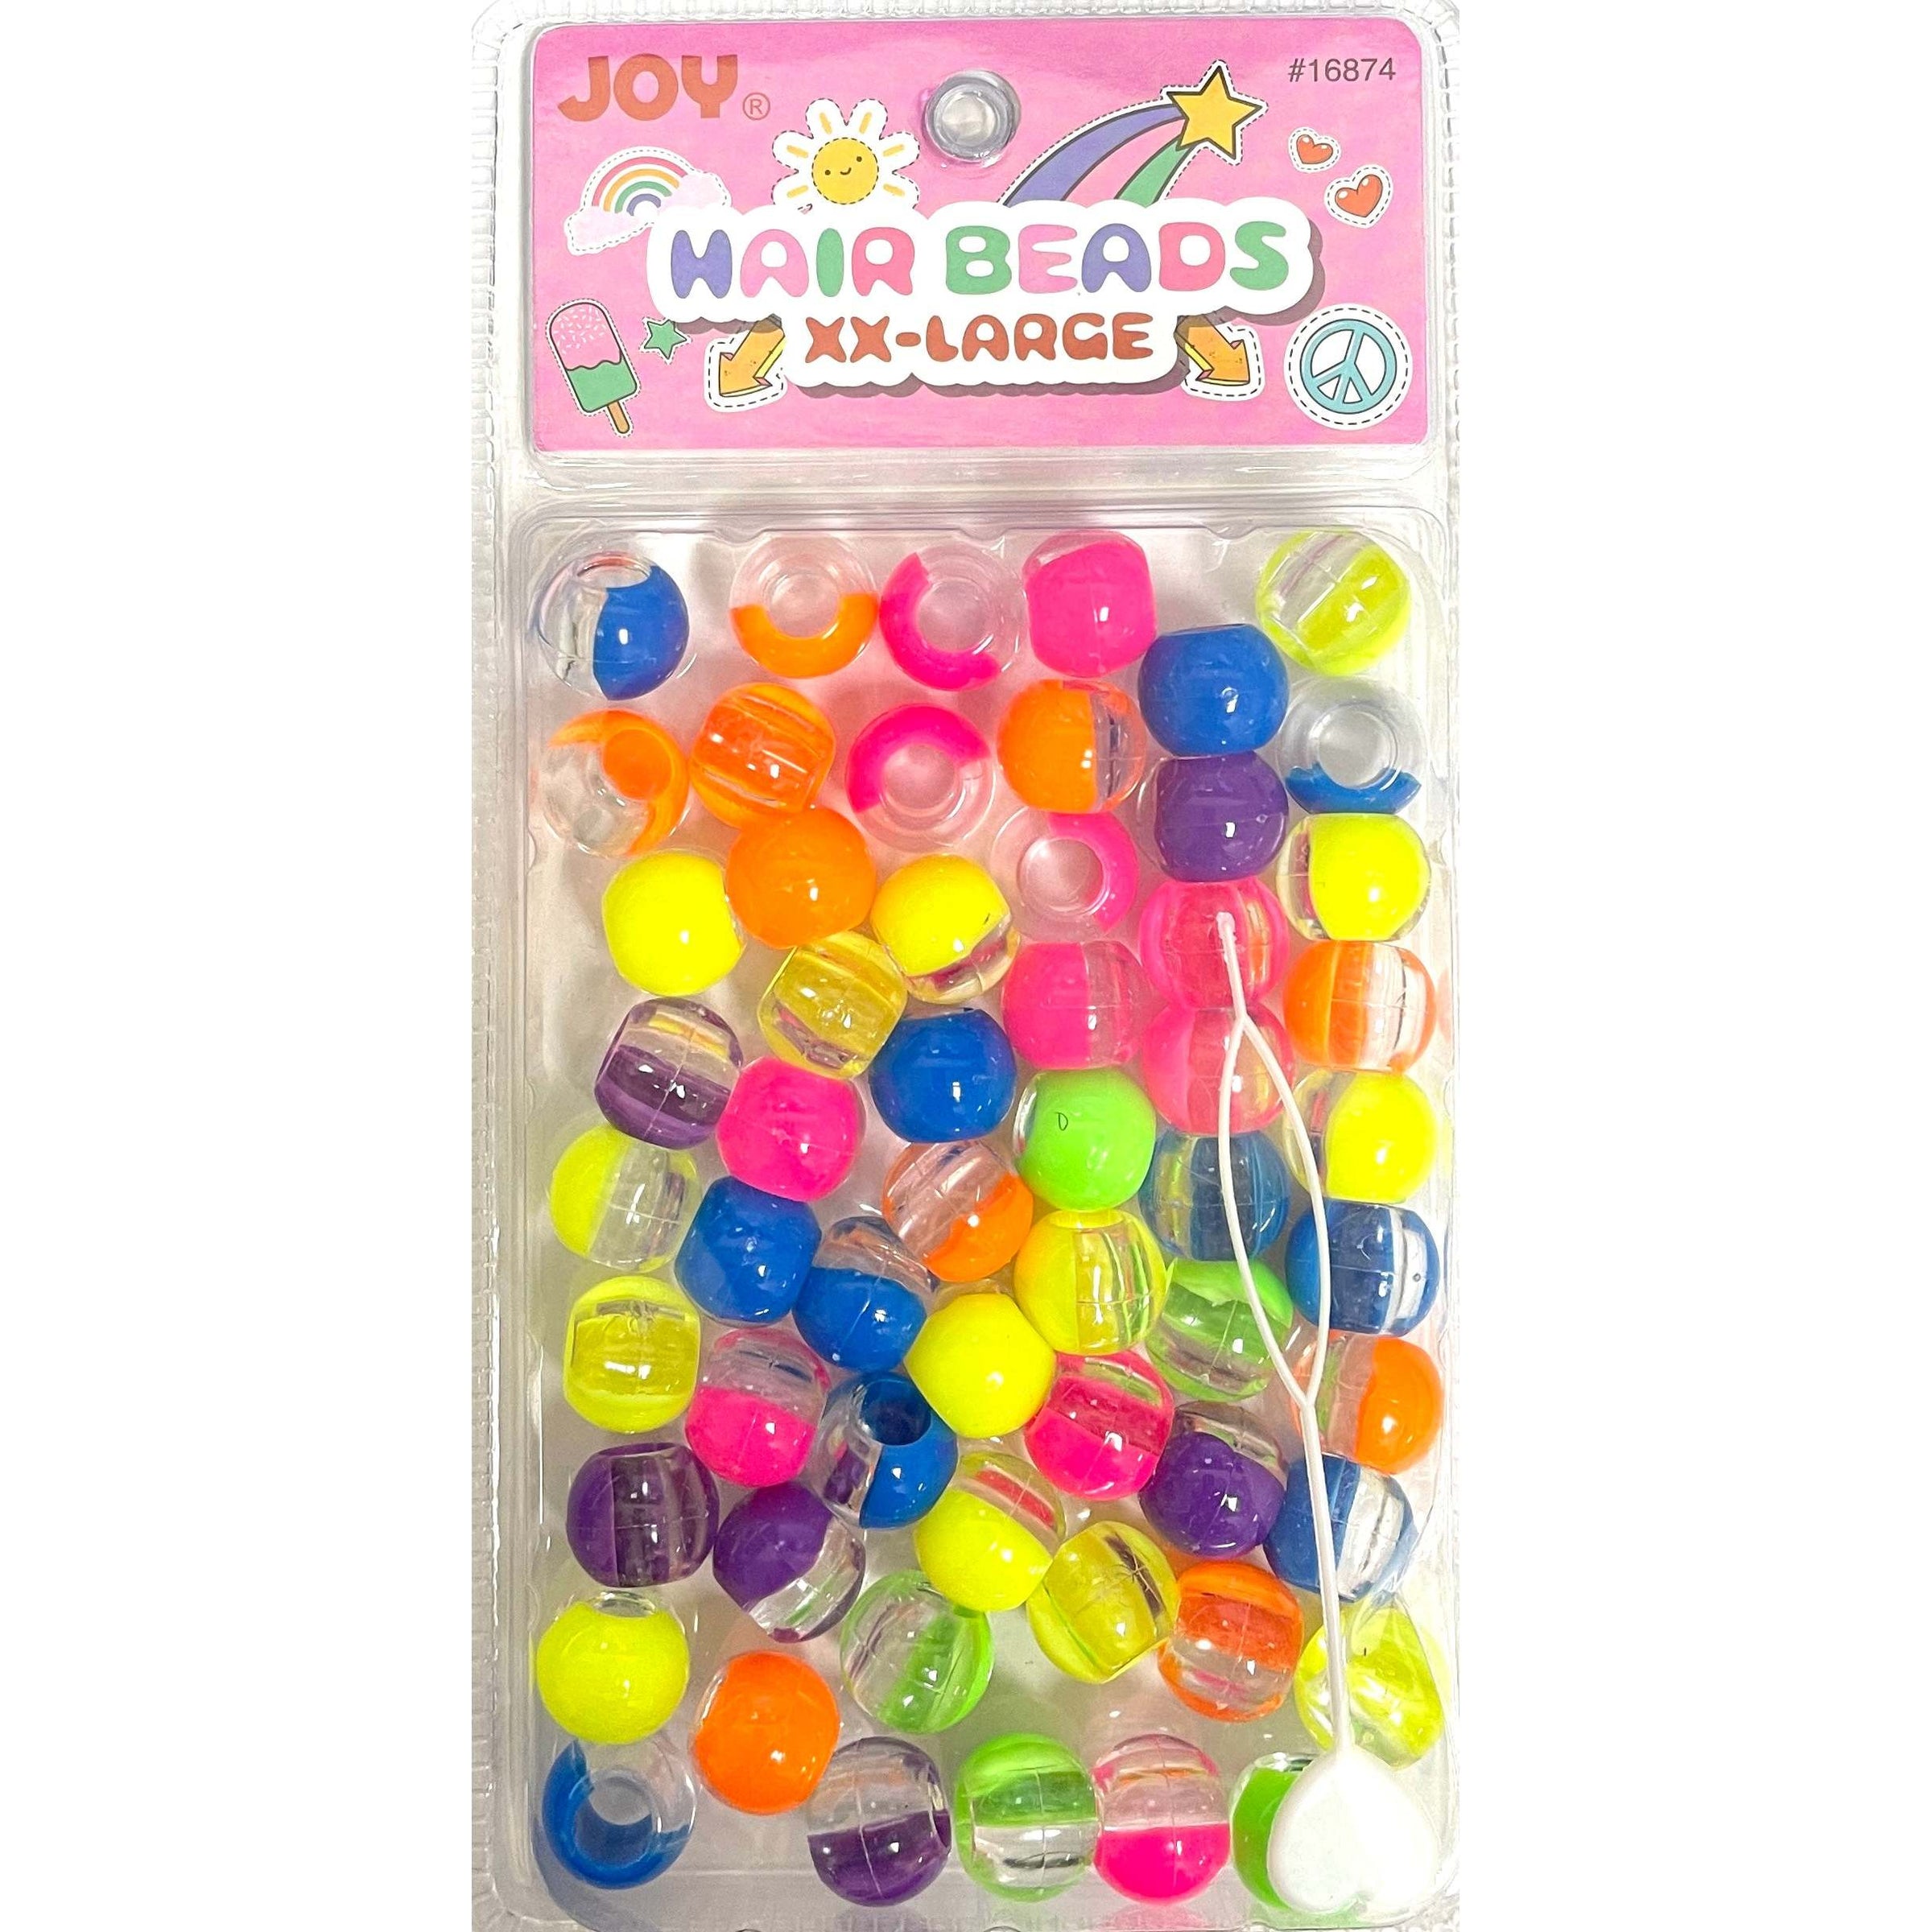 Joy Large Hair Beads 240Ct Pink & Clear